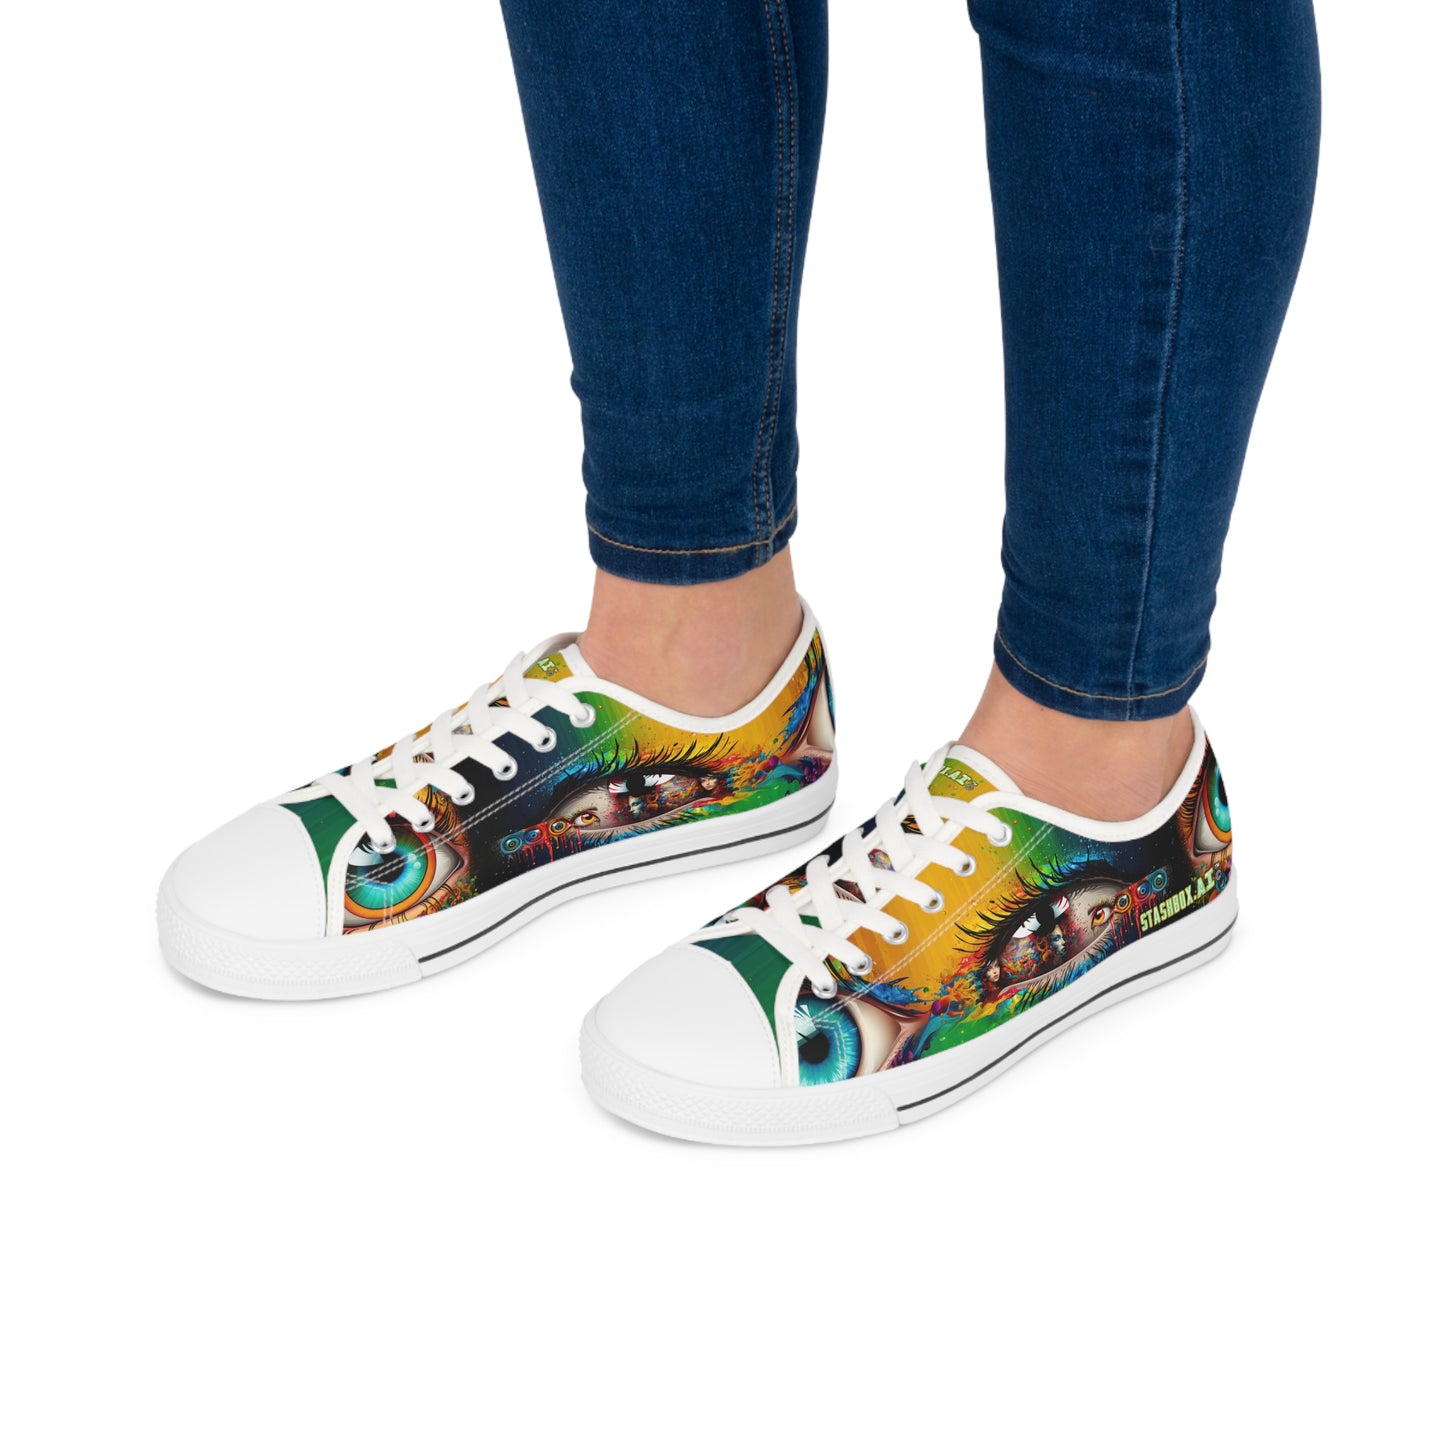 Vibrant Eyes Psychedelic Women's Sneakers - Stashbox Exclusive Design - #ColorfulFootwear #StylishSneakers #PsychedelicFashion